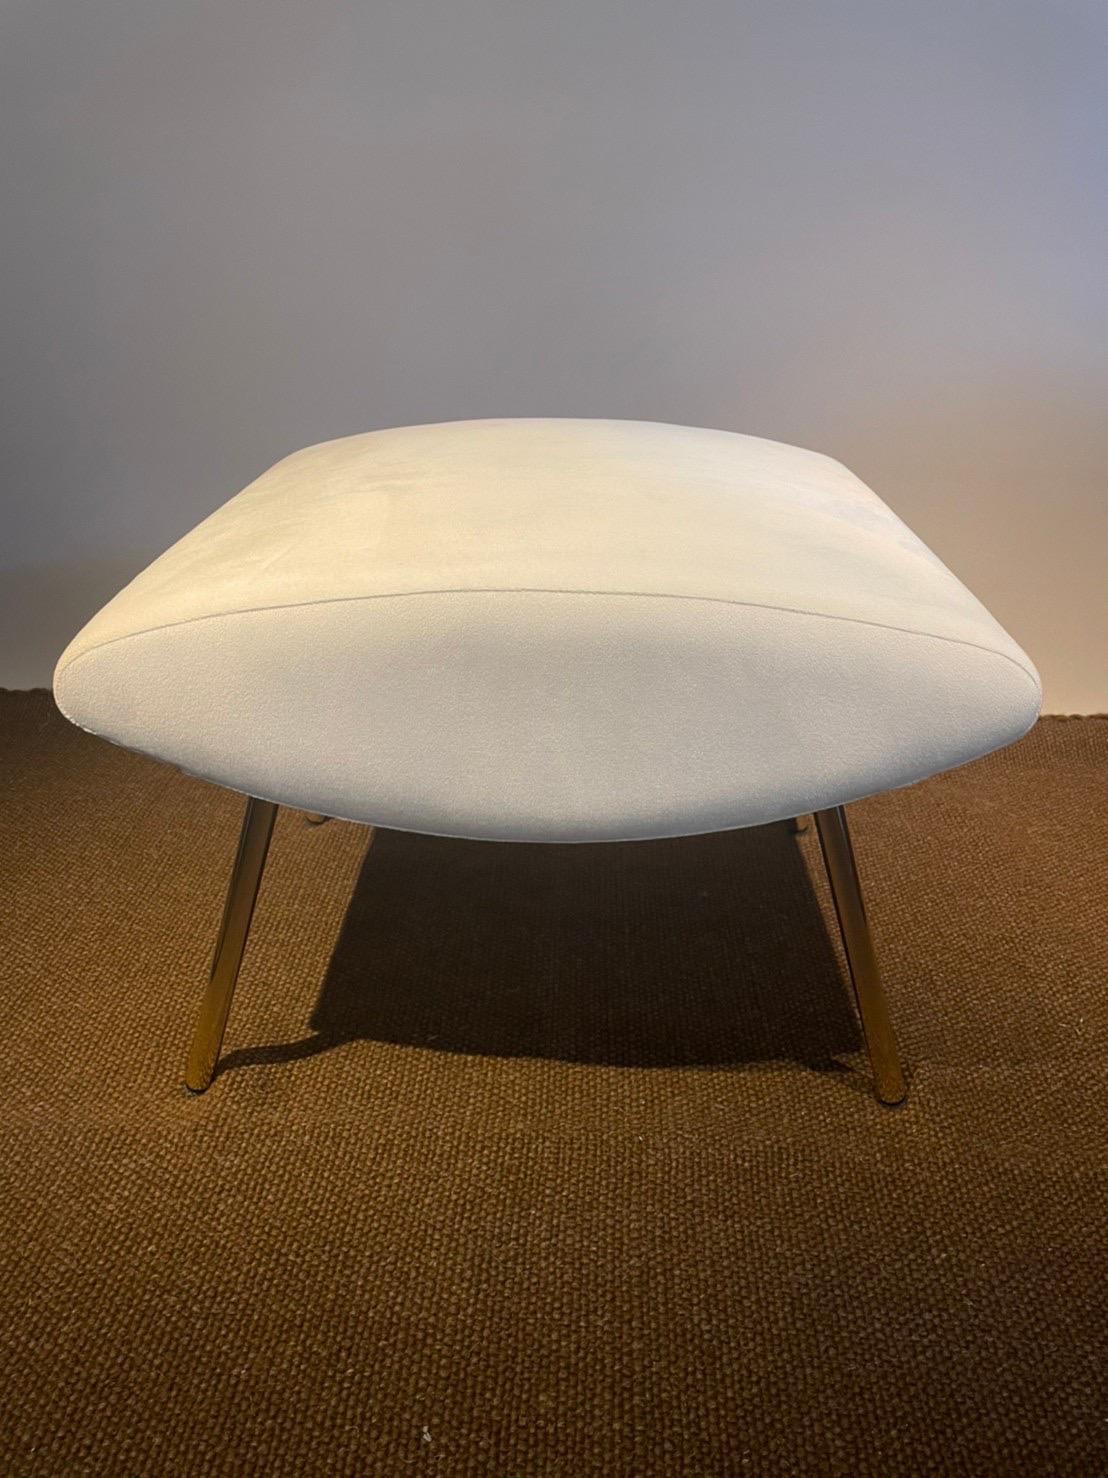 This ottoman is a display sample made for the European lounge chair.
The upholstery fabric is KINGHAM RELOADED made by Italian maker CHIVASSO.
The legs are brass plated over the steel.
It can be disassembled for the seat and leg, so it will help to